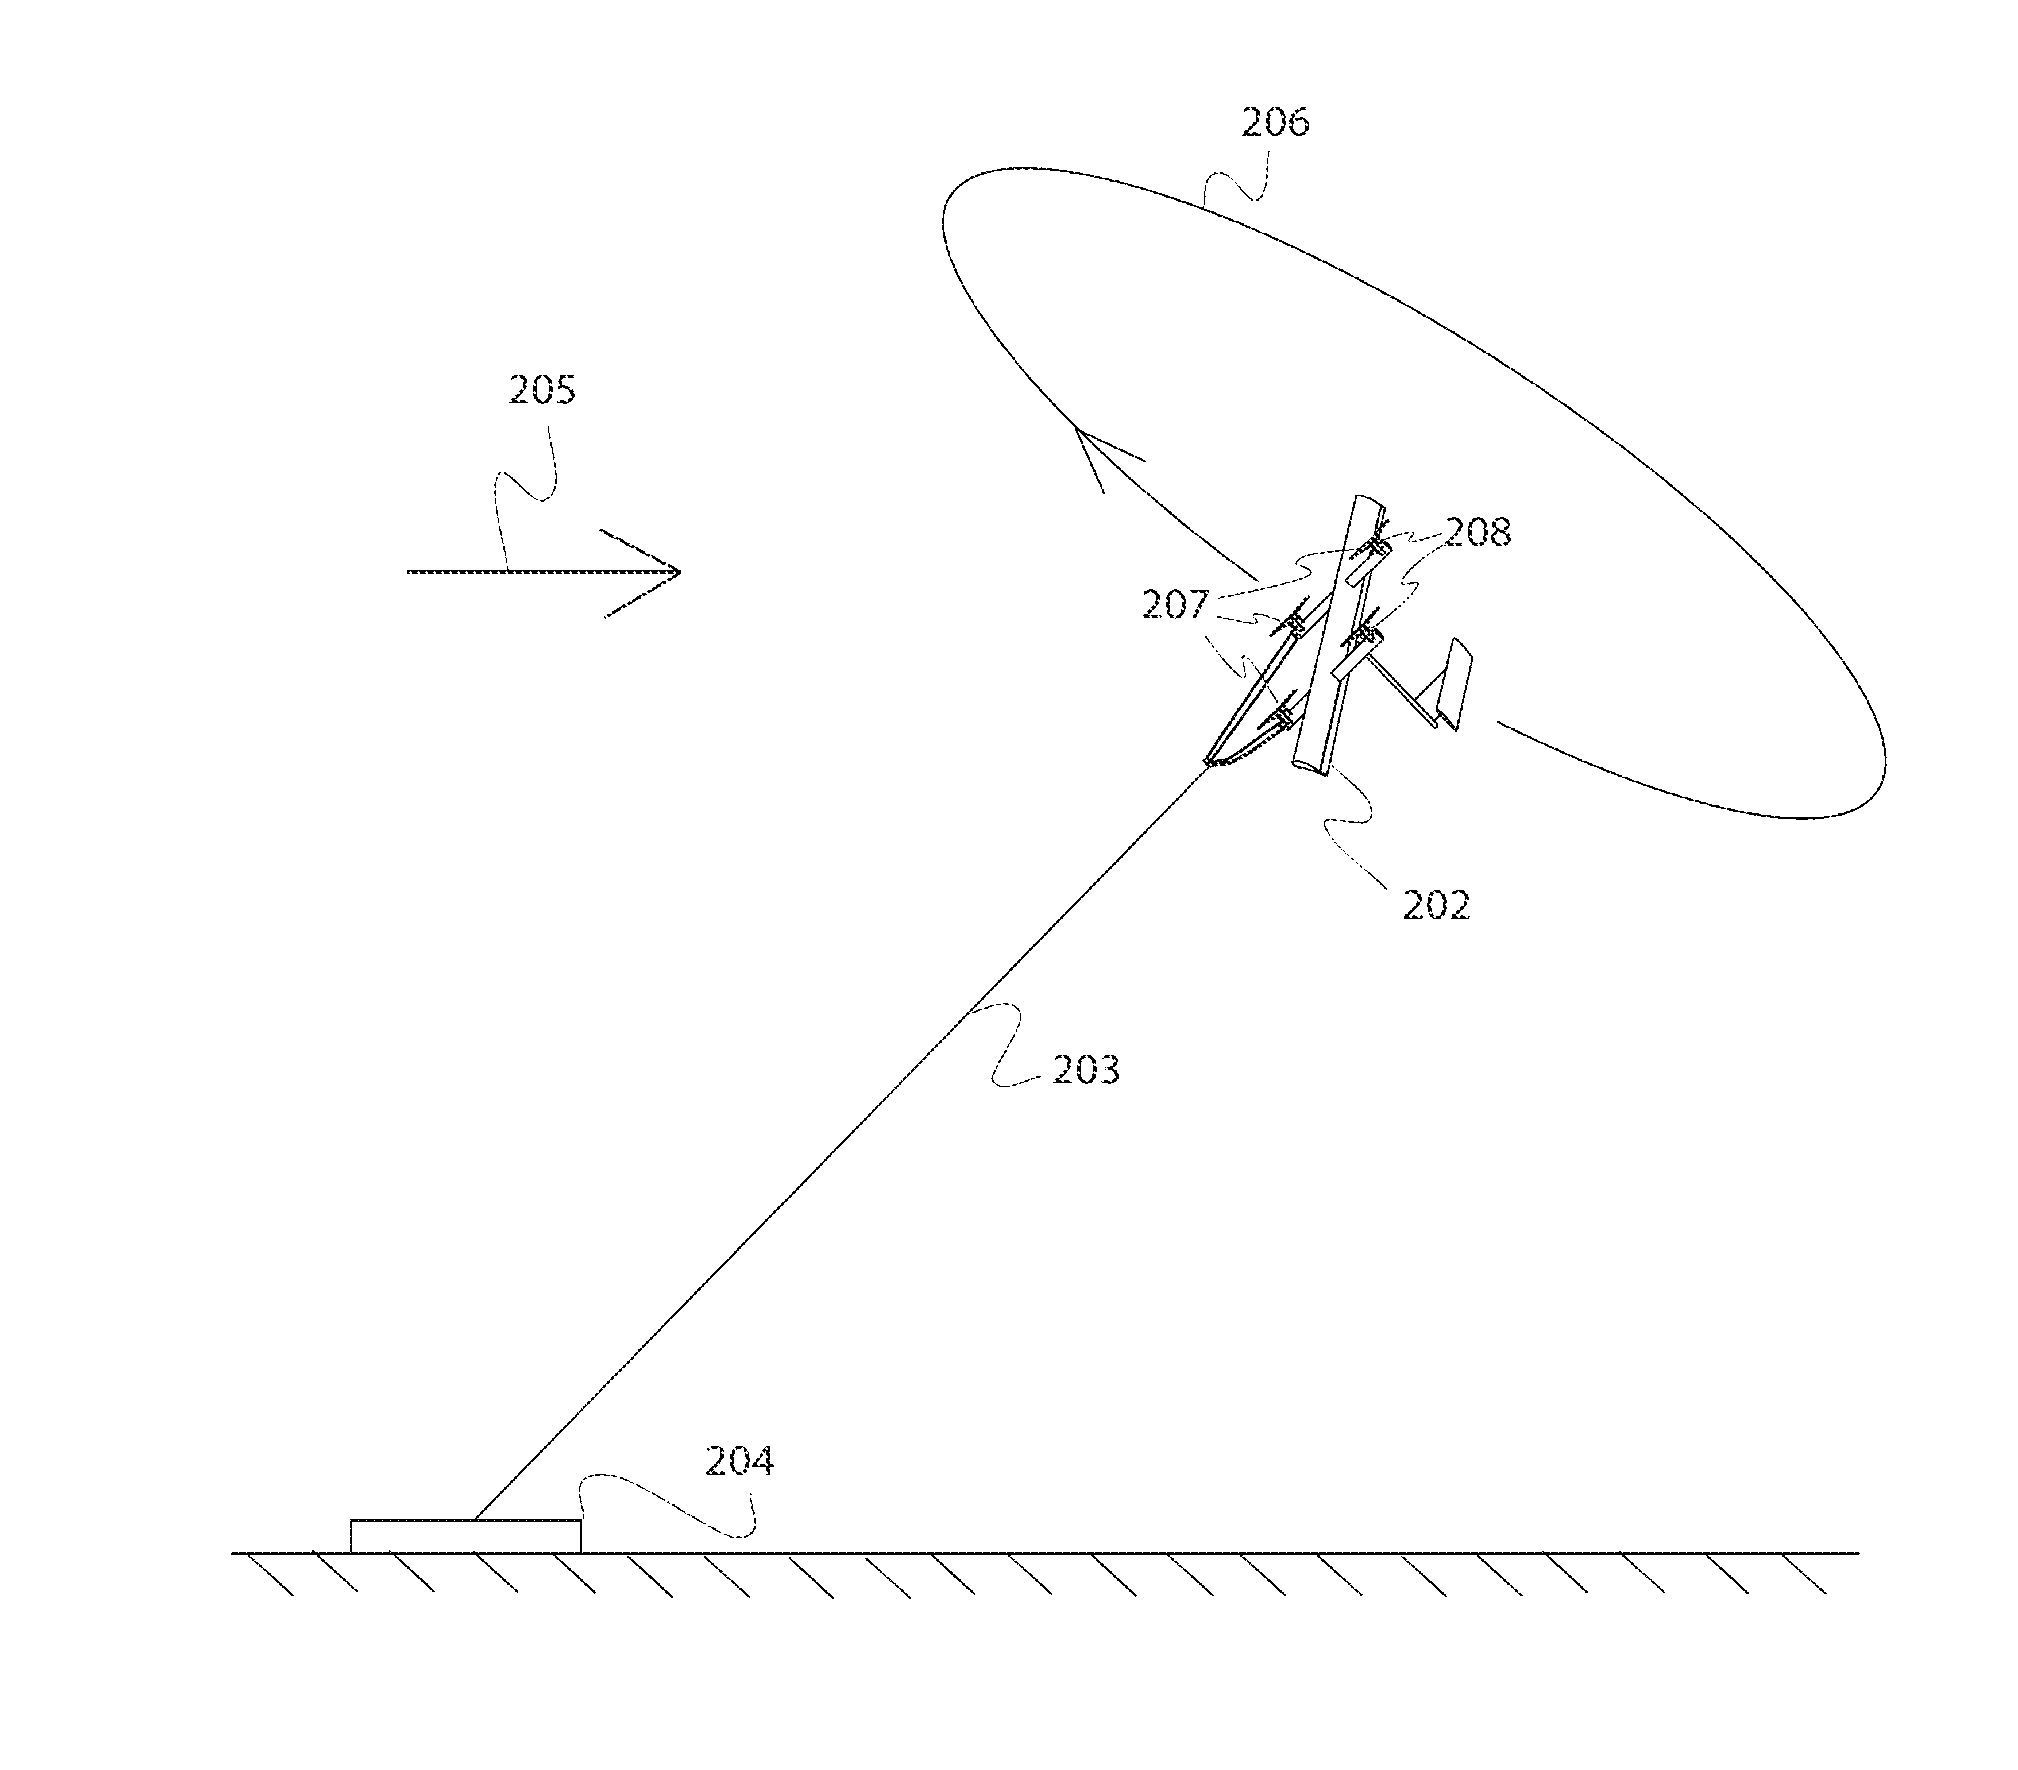 Kite configuration and flight strategy for flight in high wind speeds